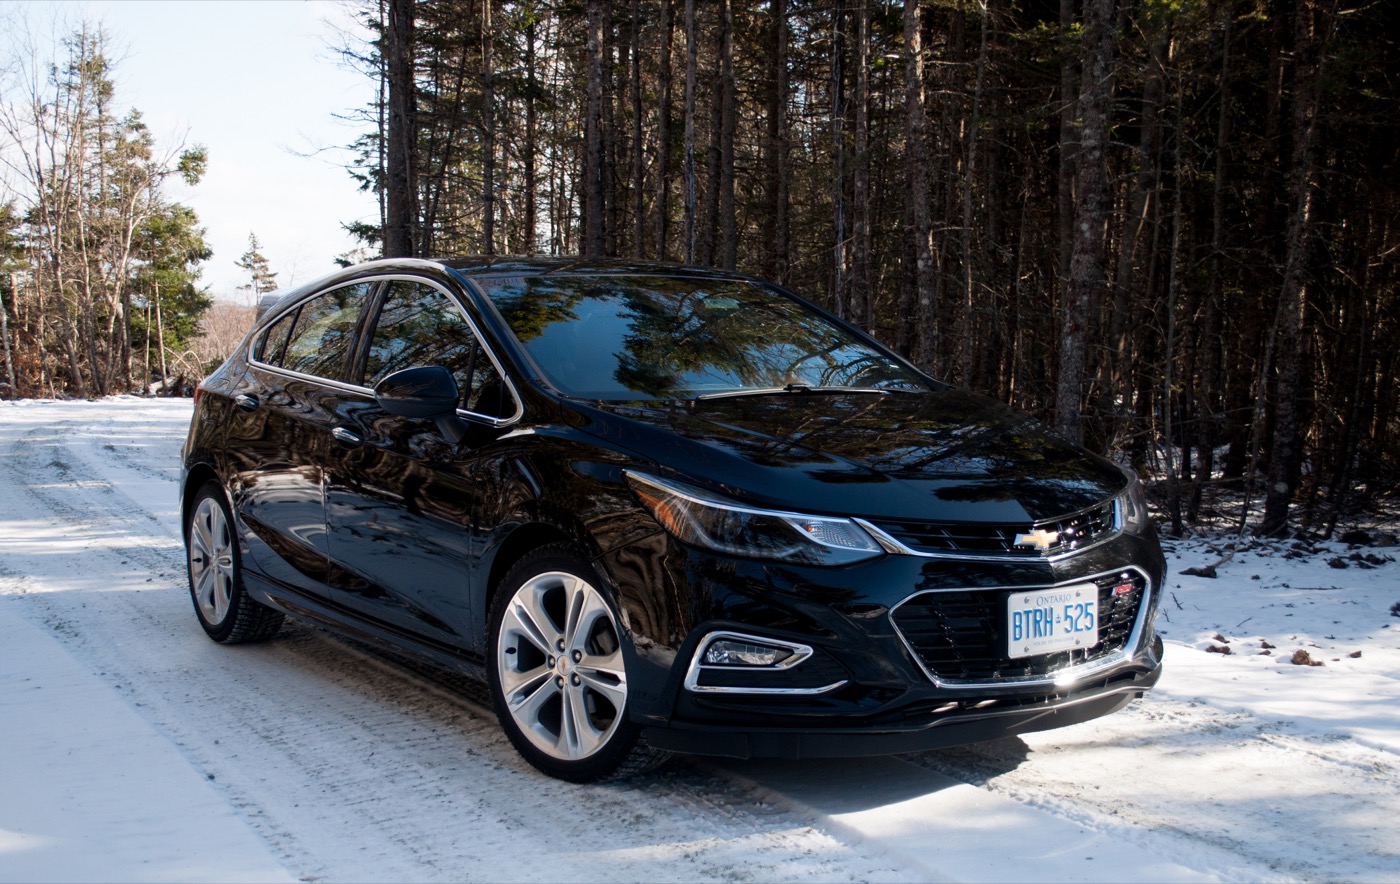 Review: 2017 Chevrolet Cruze Hatchback Premier - A Good Car In Need Of ...